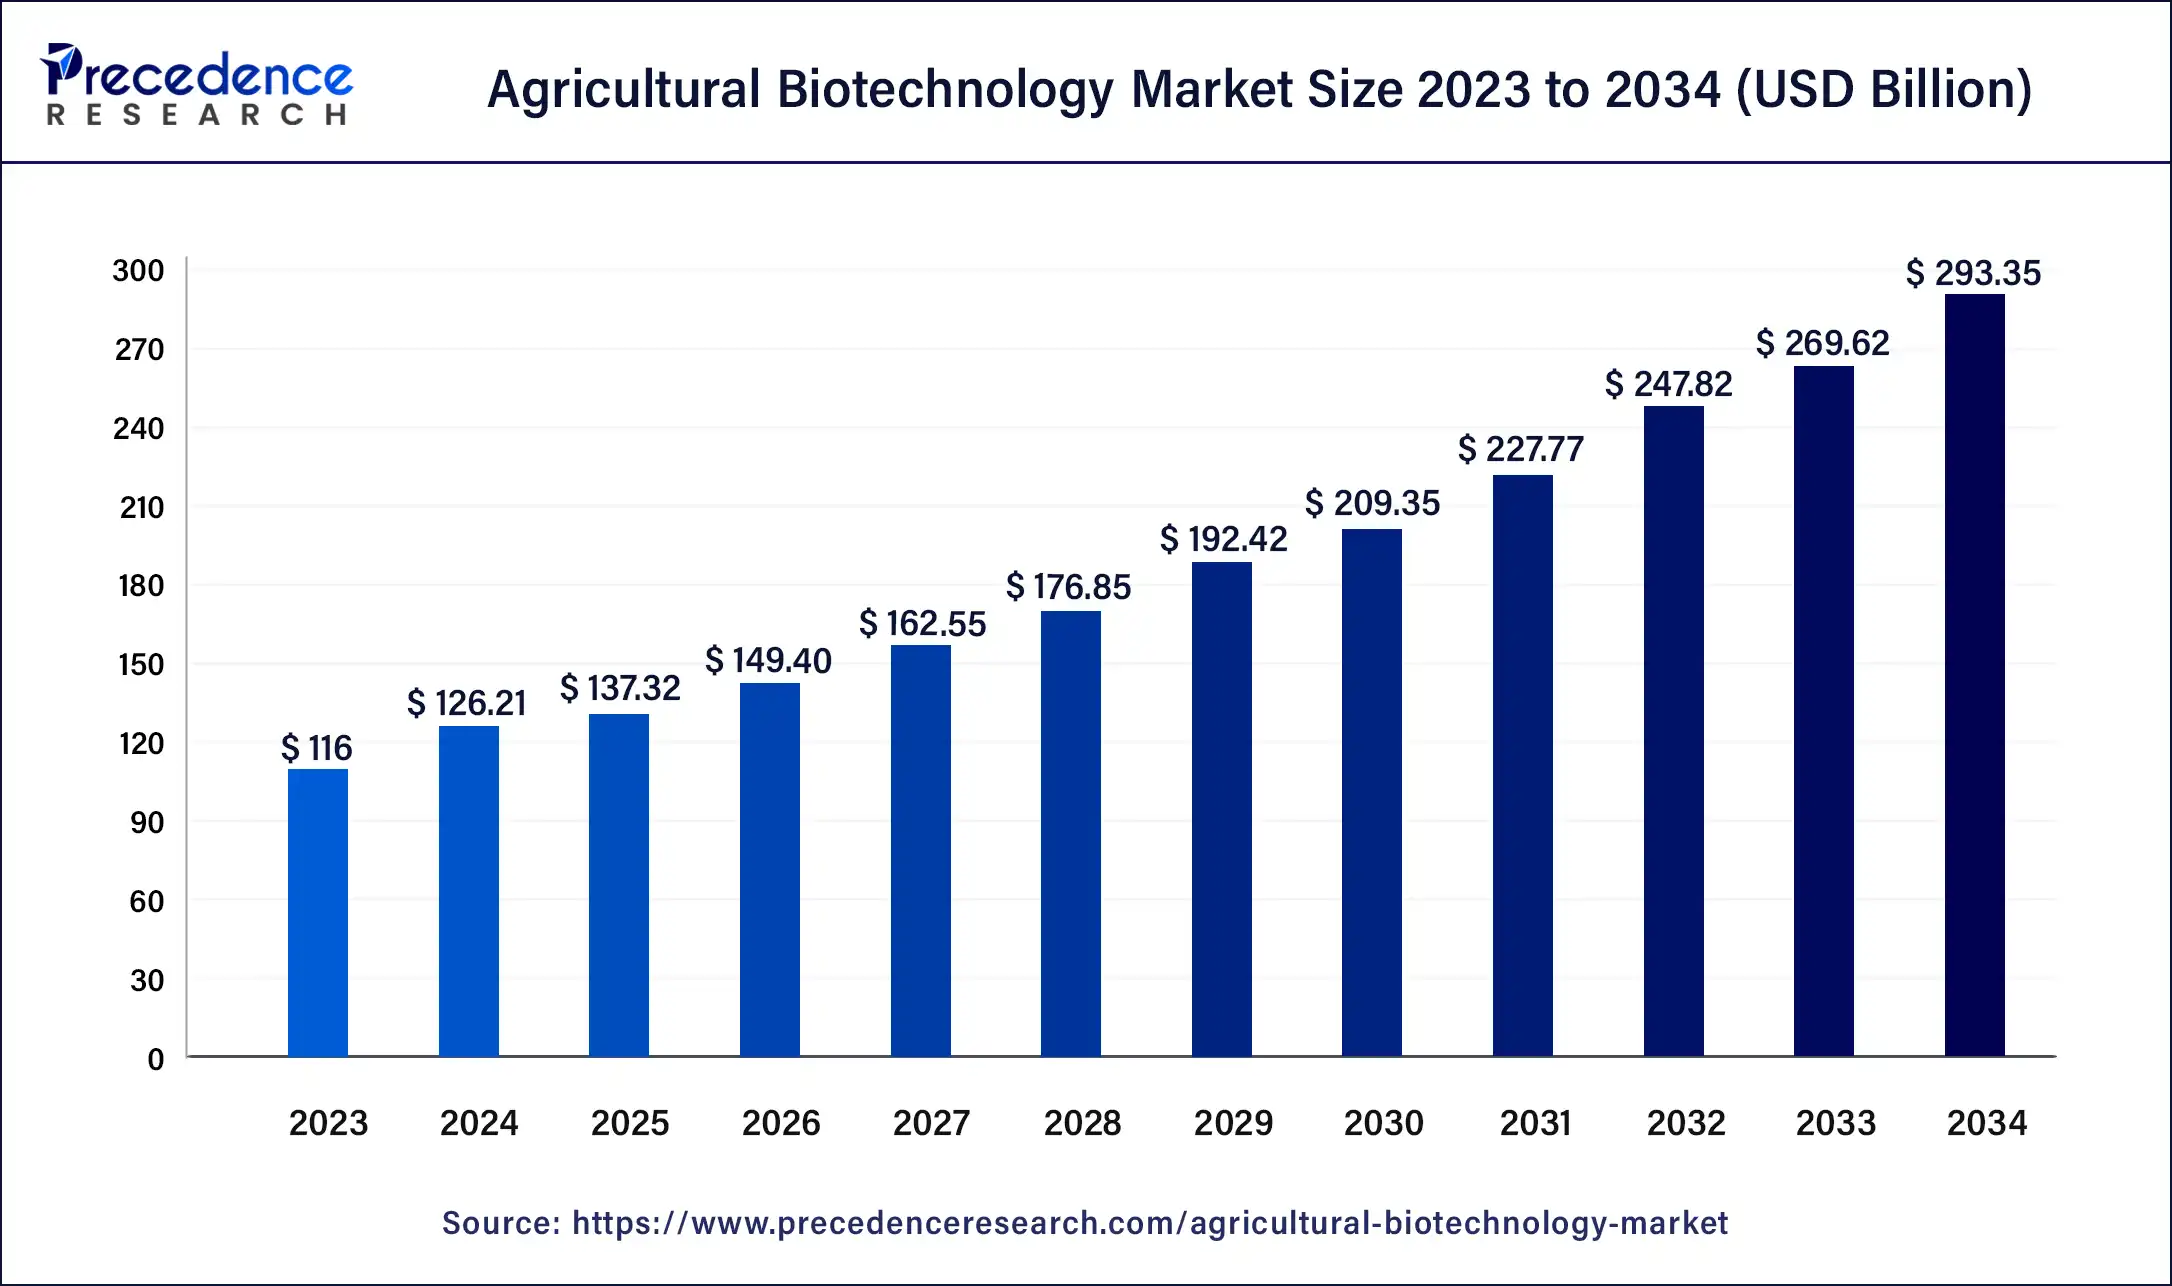 Agricultural Biotechnology Market Size 2024 to 2033